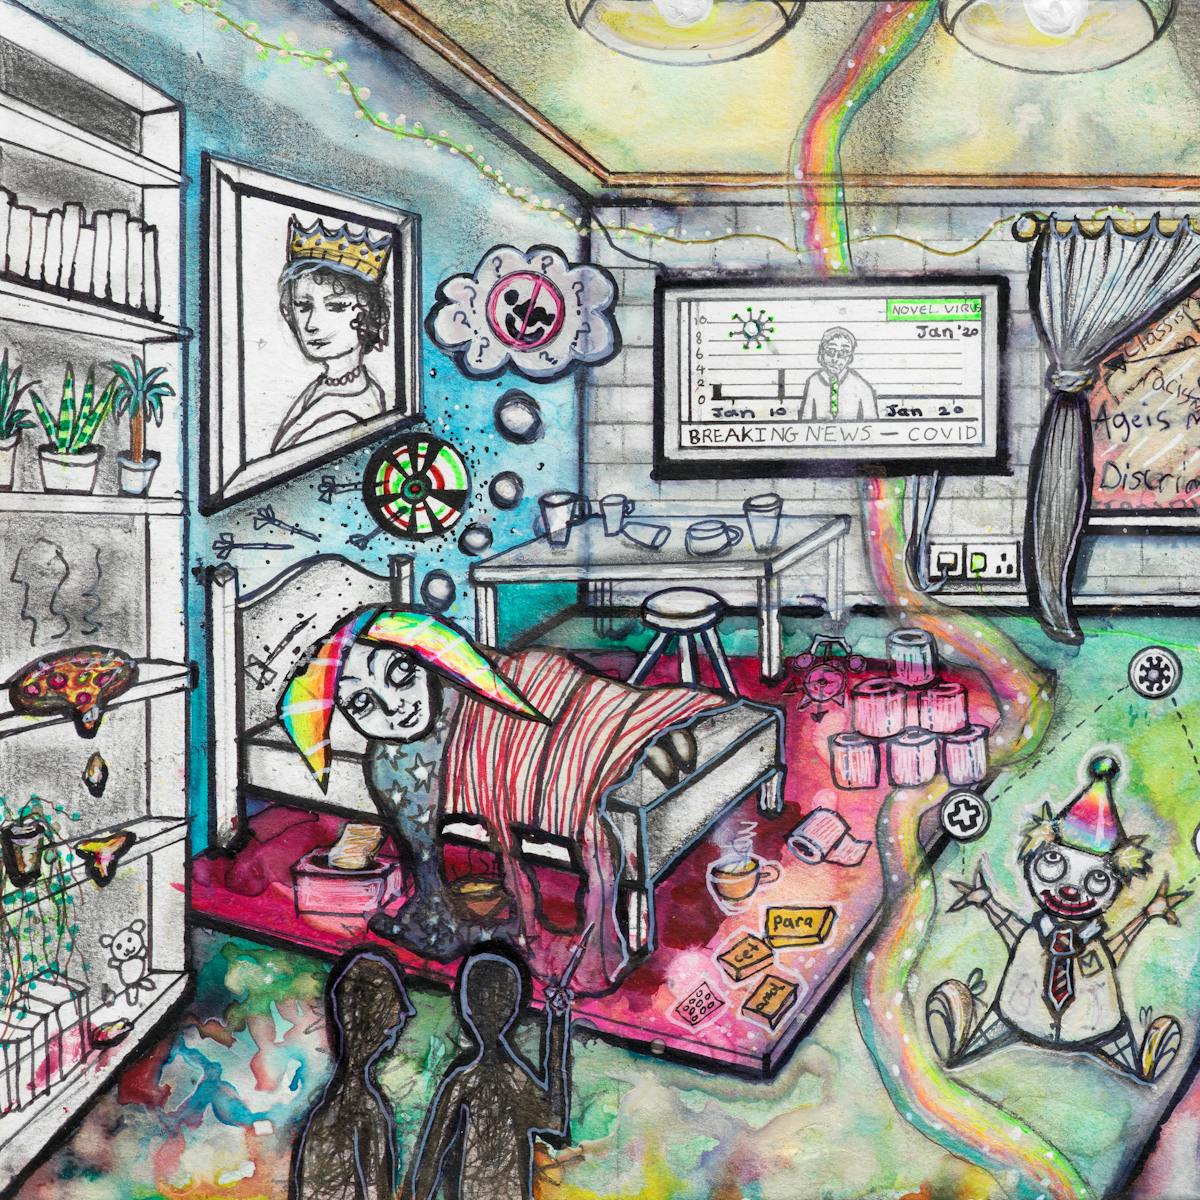 Artwork using watercolour and ink incorporating collaged words throughout the scene. The artwork shows a busy multi-coloured room. On the left hand side of the image a woman with rainbow coloured hair is lying in bed.  On the floor there are: packets of paracetamol; toilet rolls; and a toy clown juggling first aid, corona virus and pound symbols. In the foreground the silhouette of two people stand together at a distance from the bed. A rainbow flows across the room where a television mounted on the wall delivers Covid related news. Alongside the television, a window overlooking the outside world is filled with words including ‘ableism’.  Next to the window is a door with a few words including the phrase ‘no access’.  Beside the door is a picture of the word ‘life’ burning in flames. On the right hand side of the image is a bar, including someone sitting on one of the bar stools, and a packet of NHS crisps exploded on the floor. On the bar is the word ‘community’.  On a pathway along which arrows dart in different directions, stands a wheelchair, this separates the bedroom scene from the bar scene.